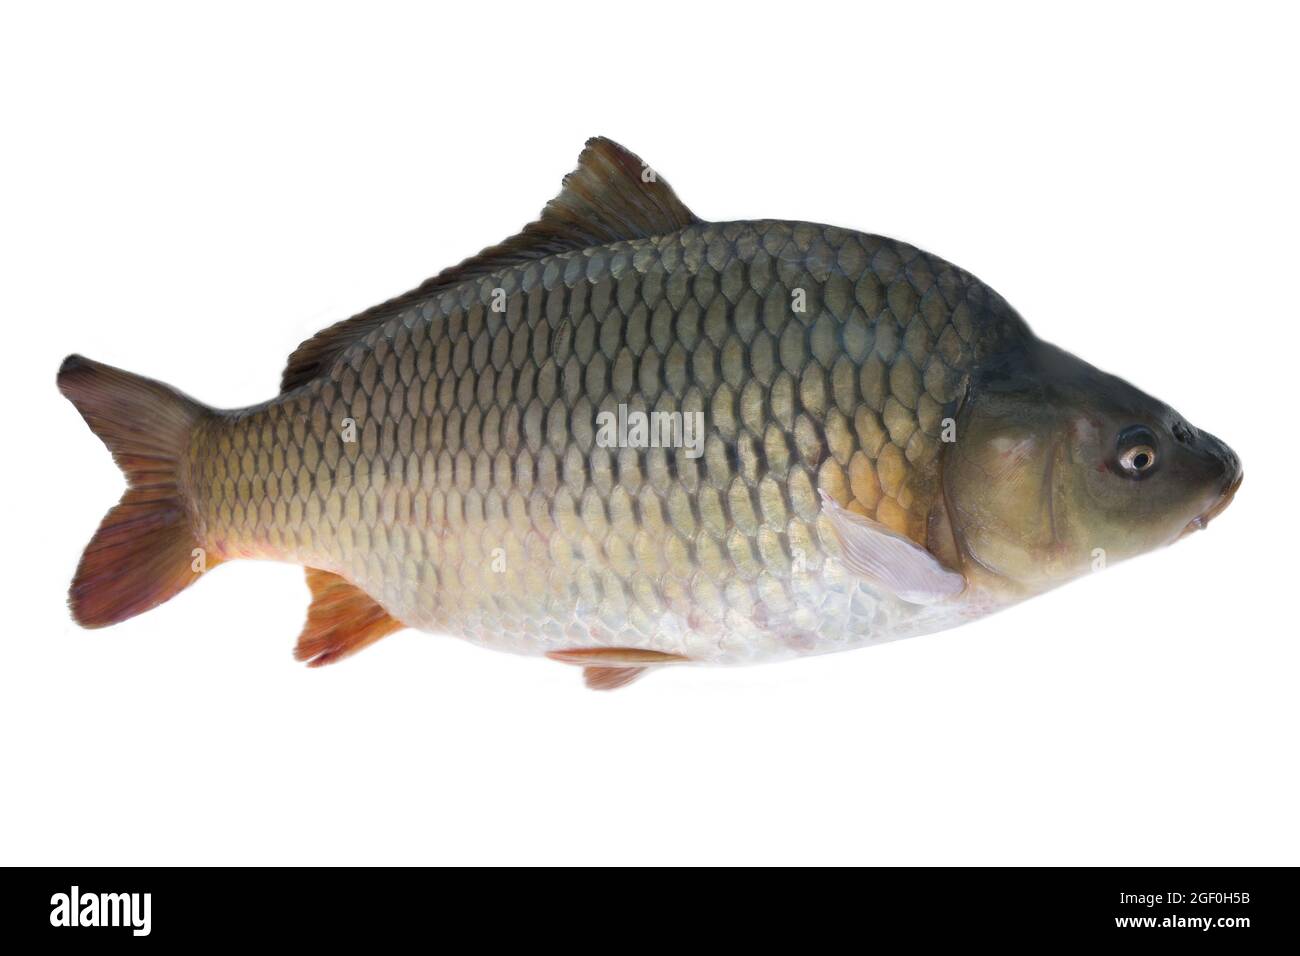 European carp (Cyprinus carpio) main object of sport fishing, leading place  in aquaculture since times of Rome and Heavenly Empire, traditional part o  Stock Photo - Alamy